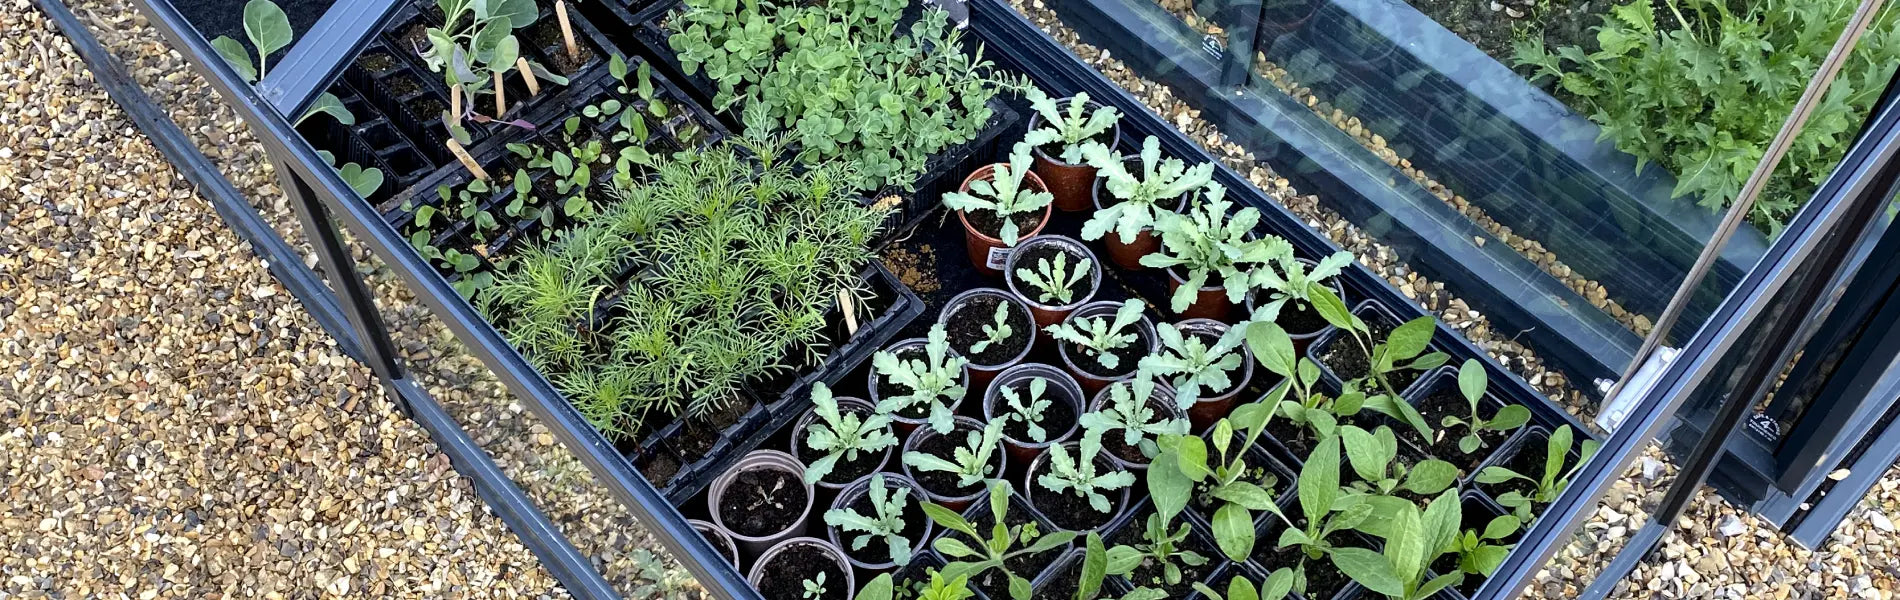 How to use a cold frame: companion planting and succession planting techniques